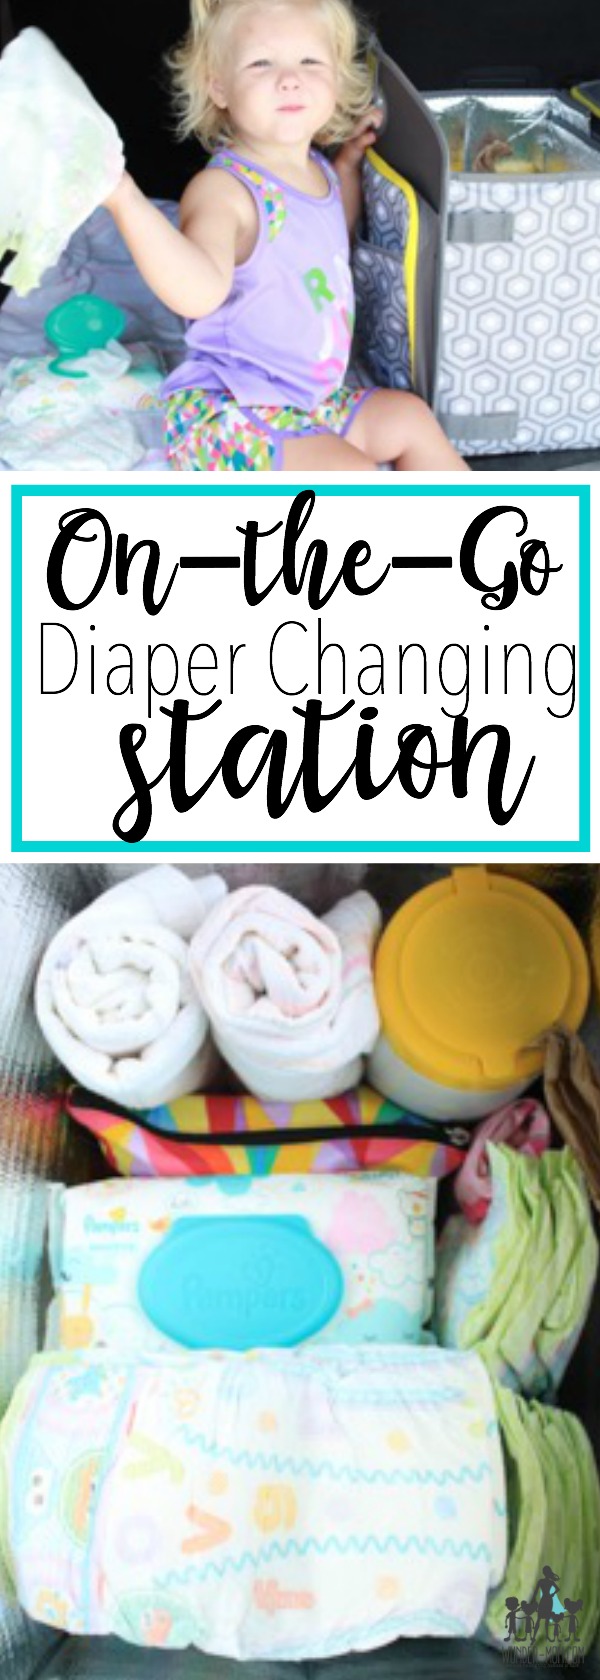 on-the-go changing station